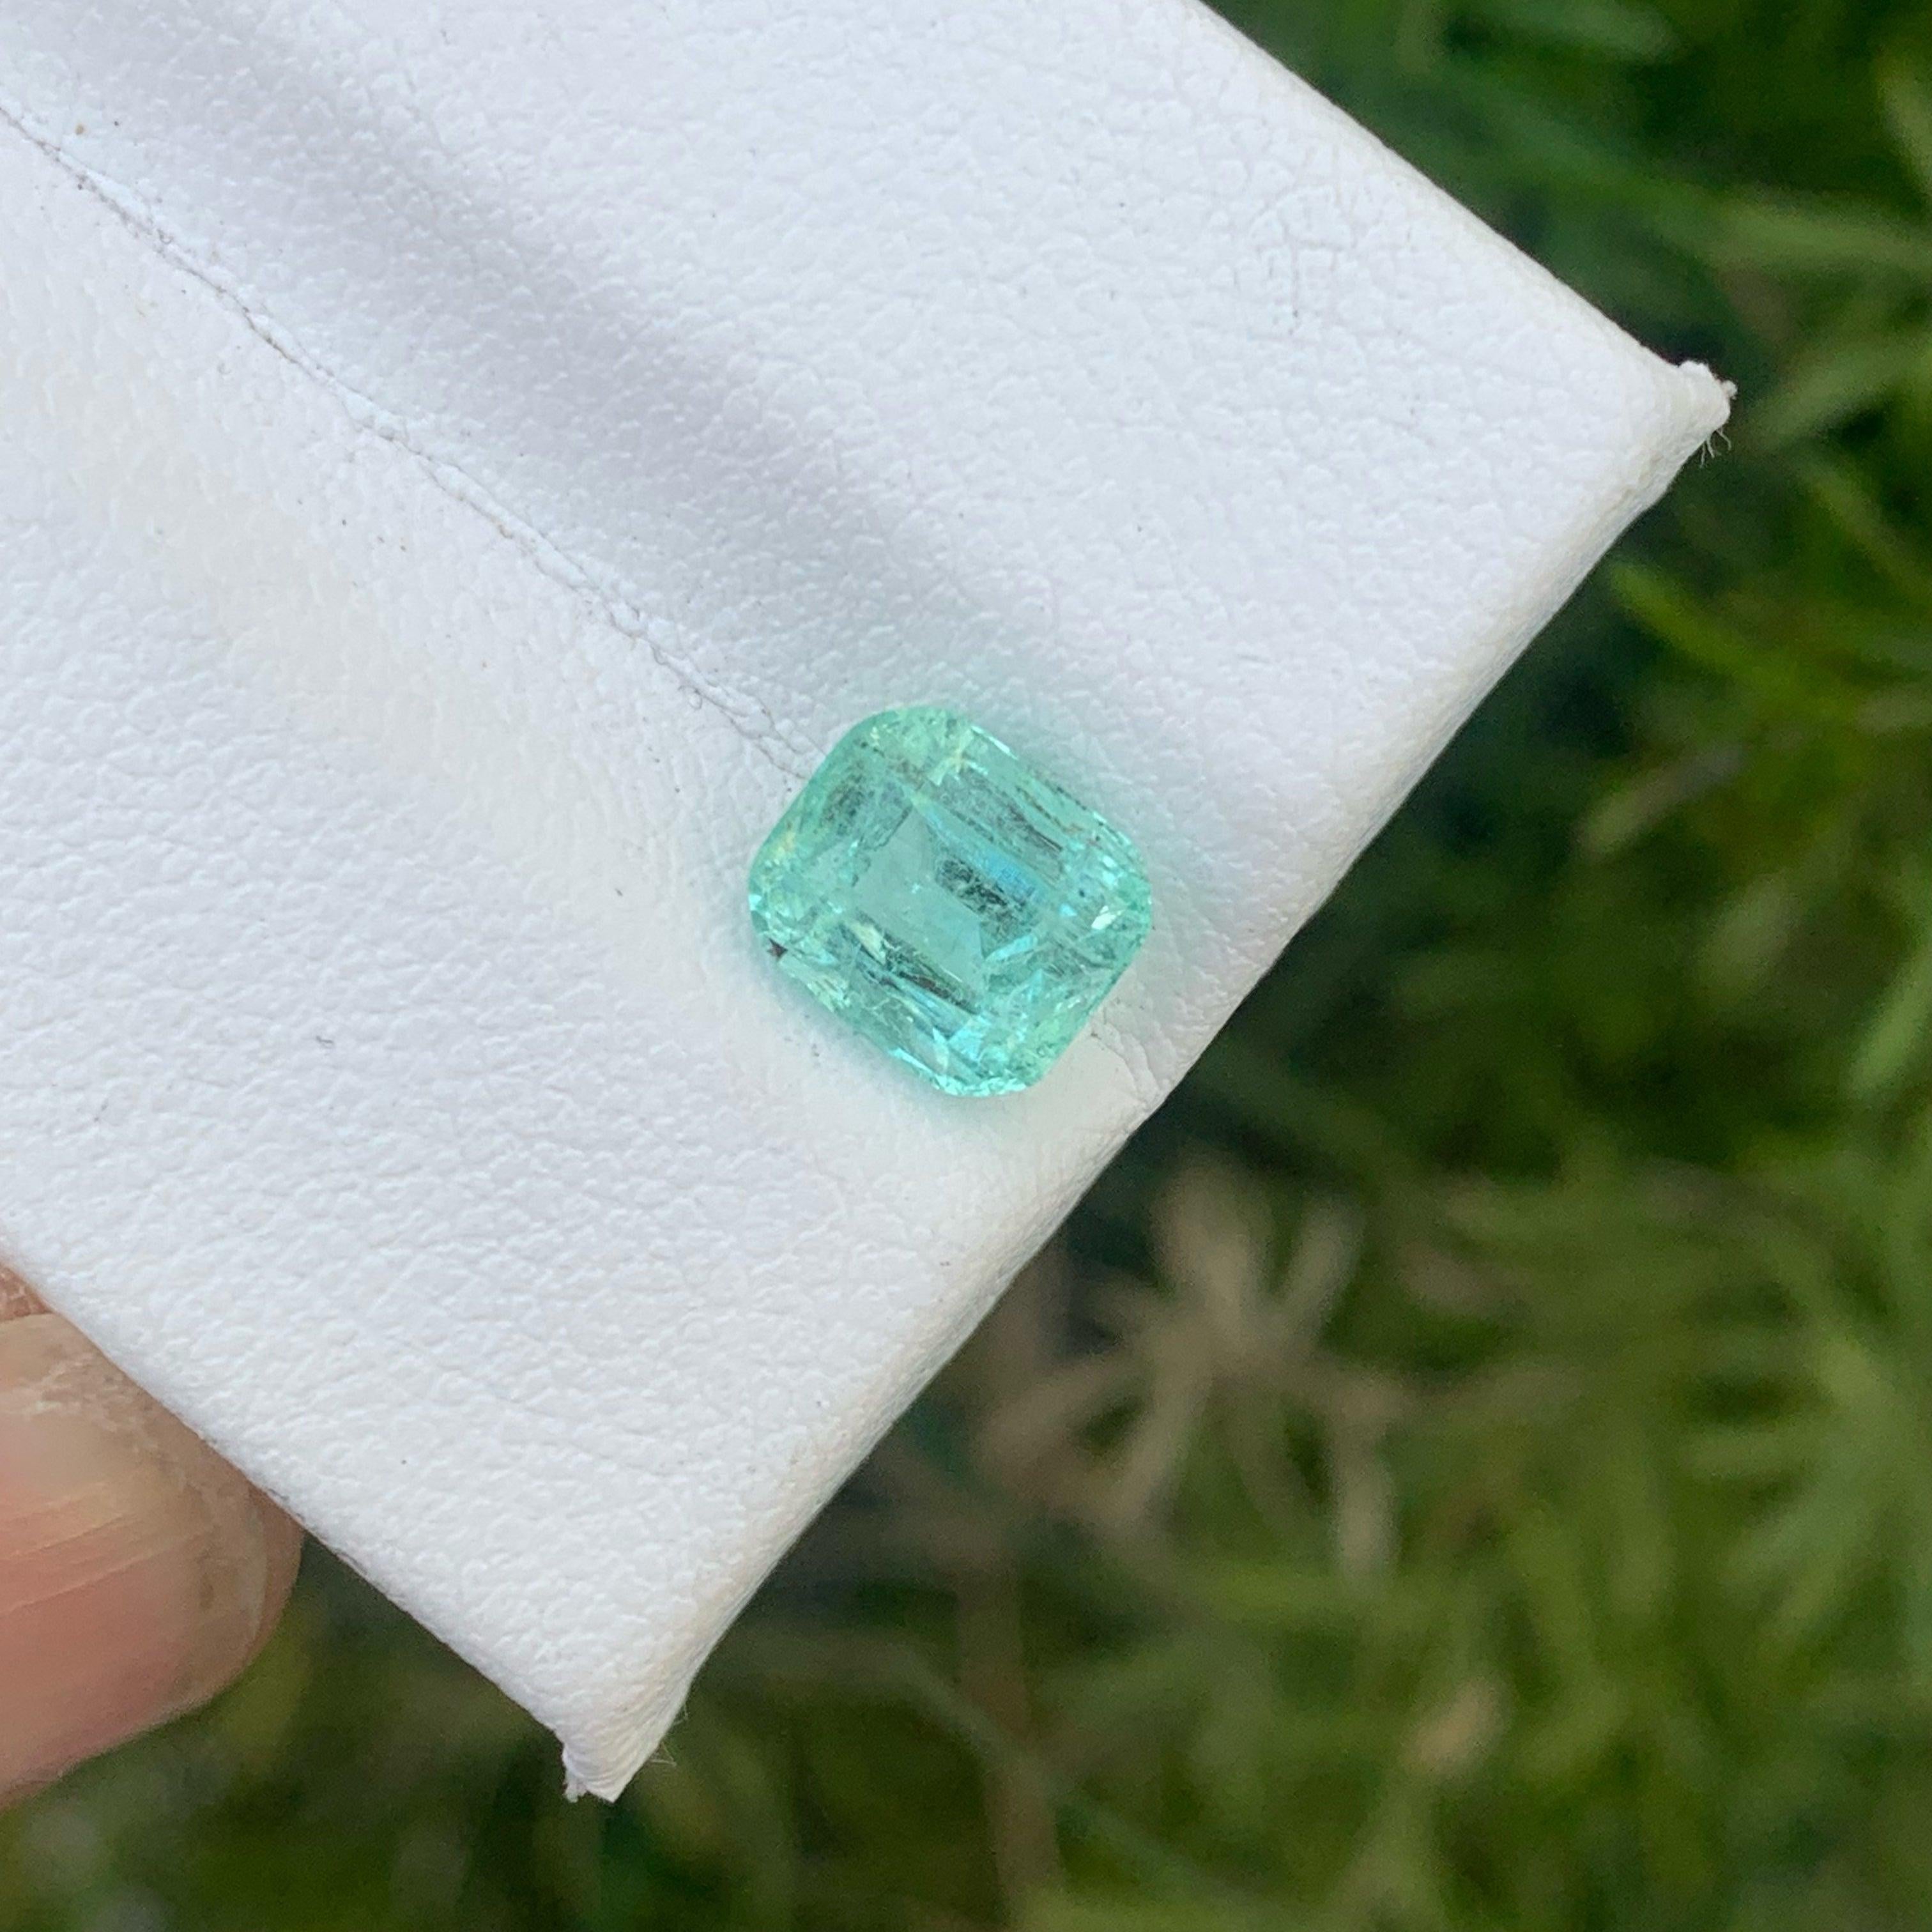 Natural Light Green Loose Emerald Gemstone, Available for sale at wholesale price natural high quality 1.50 carats SI Clarity from Loose Emerald Afghanistan.

Product Information: 
GEMSTONE NAME: Natural Light Green Loose Emerald Gemstone
WEIGHT: